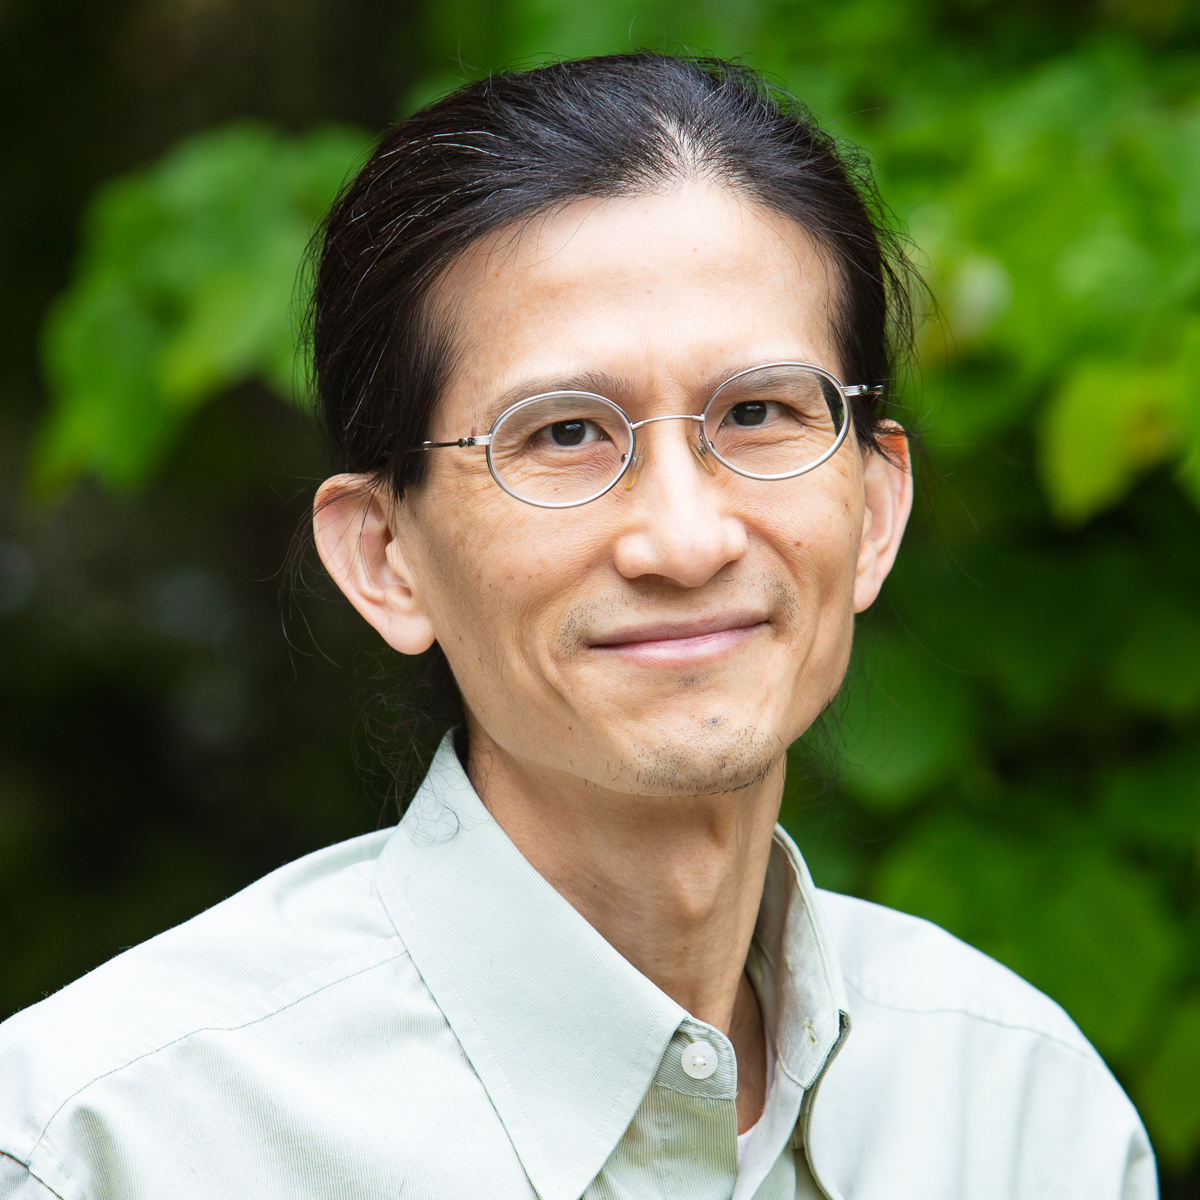 Portrait of Dr. Loong-Tak Lim at U of G's Conservatory Gardens